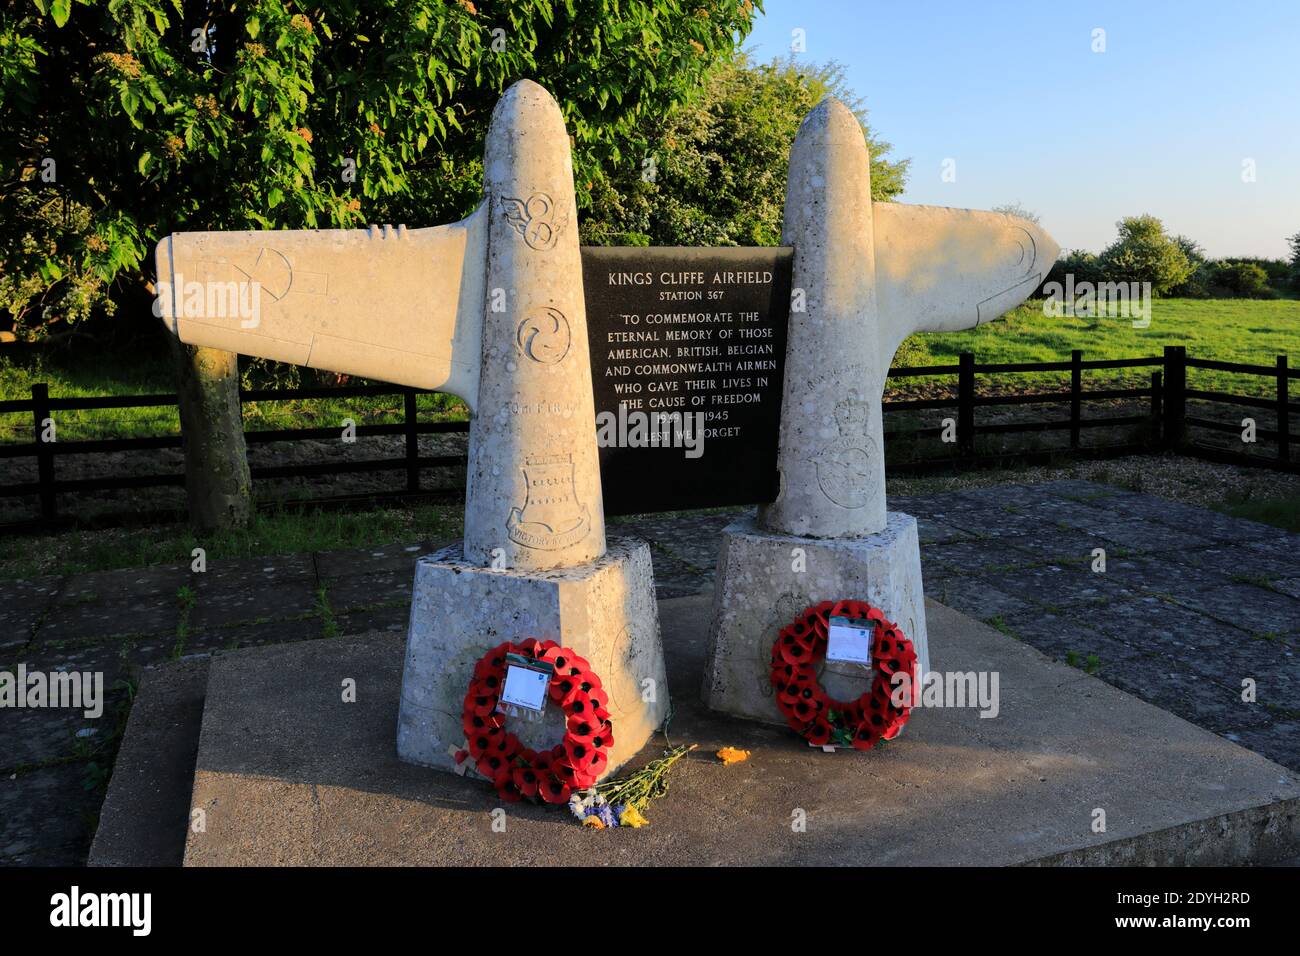 The RAF and USAF Airforces War Memorial at Kings Cliffe Airfield, Kings Cliffe village, Northamptonshire; England; UK This World War II airfield is th Stock Photo